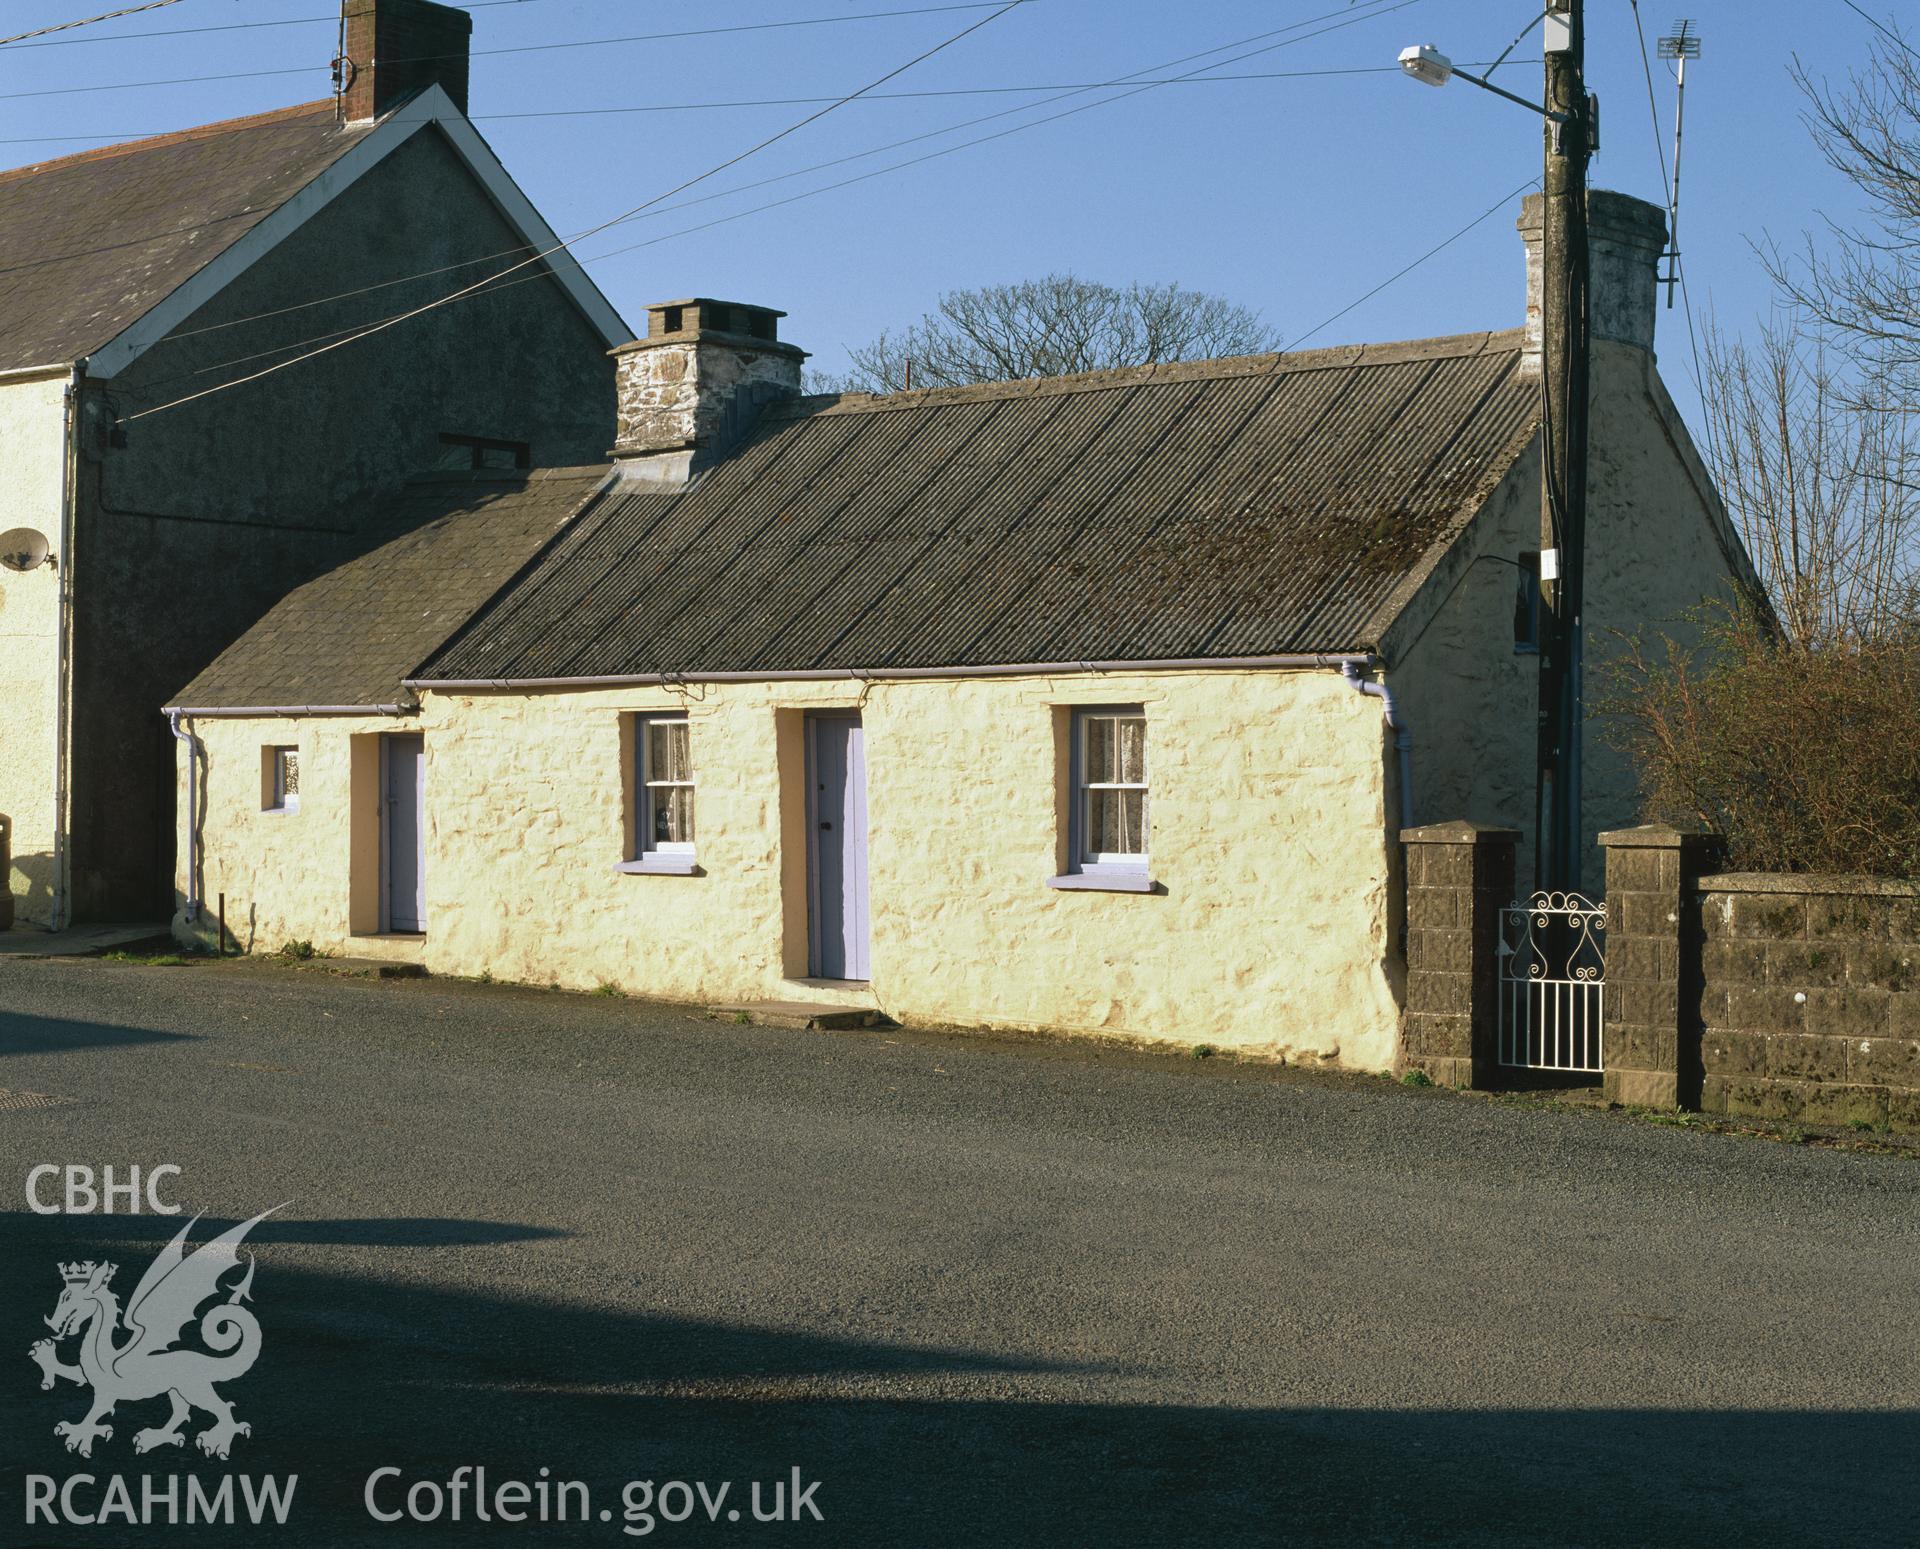 RCAHMW colour transparency showing view of New House, Puncheston taken by I.N. Wright, 2003.